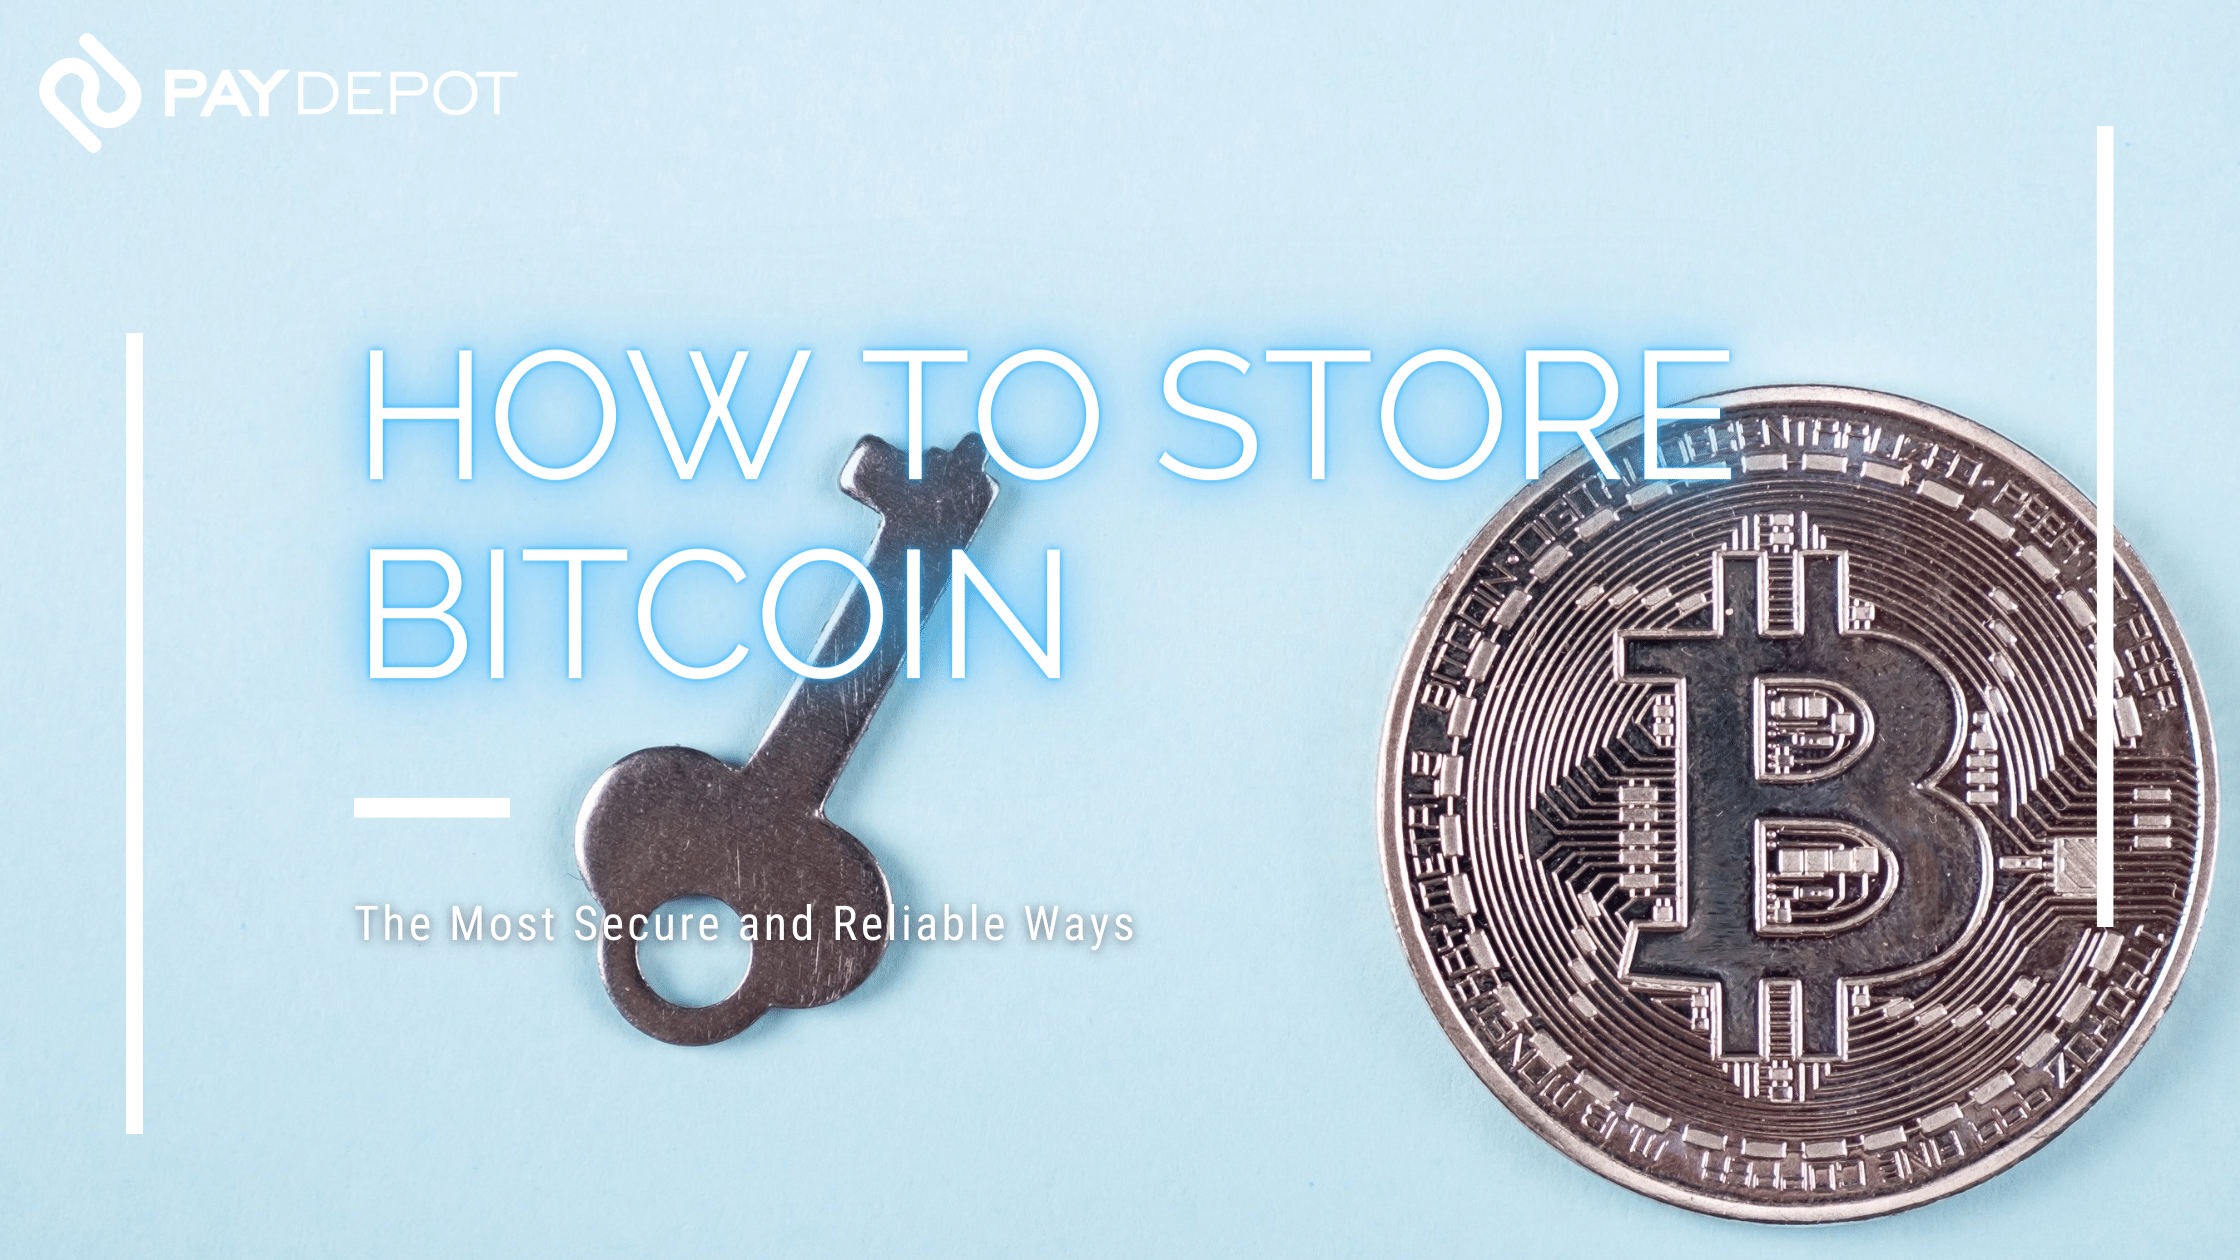 How to Store Bitcoin - The Most Secure and Reliable Ways